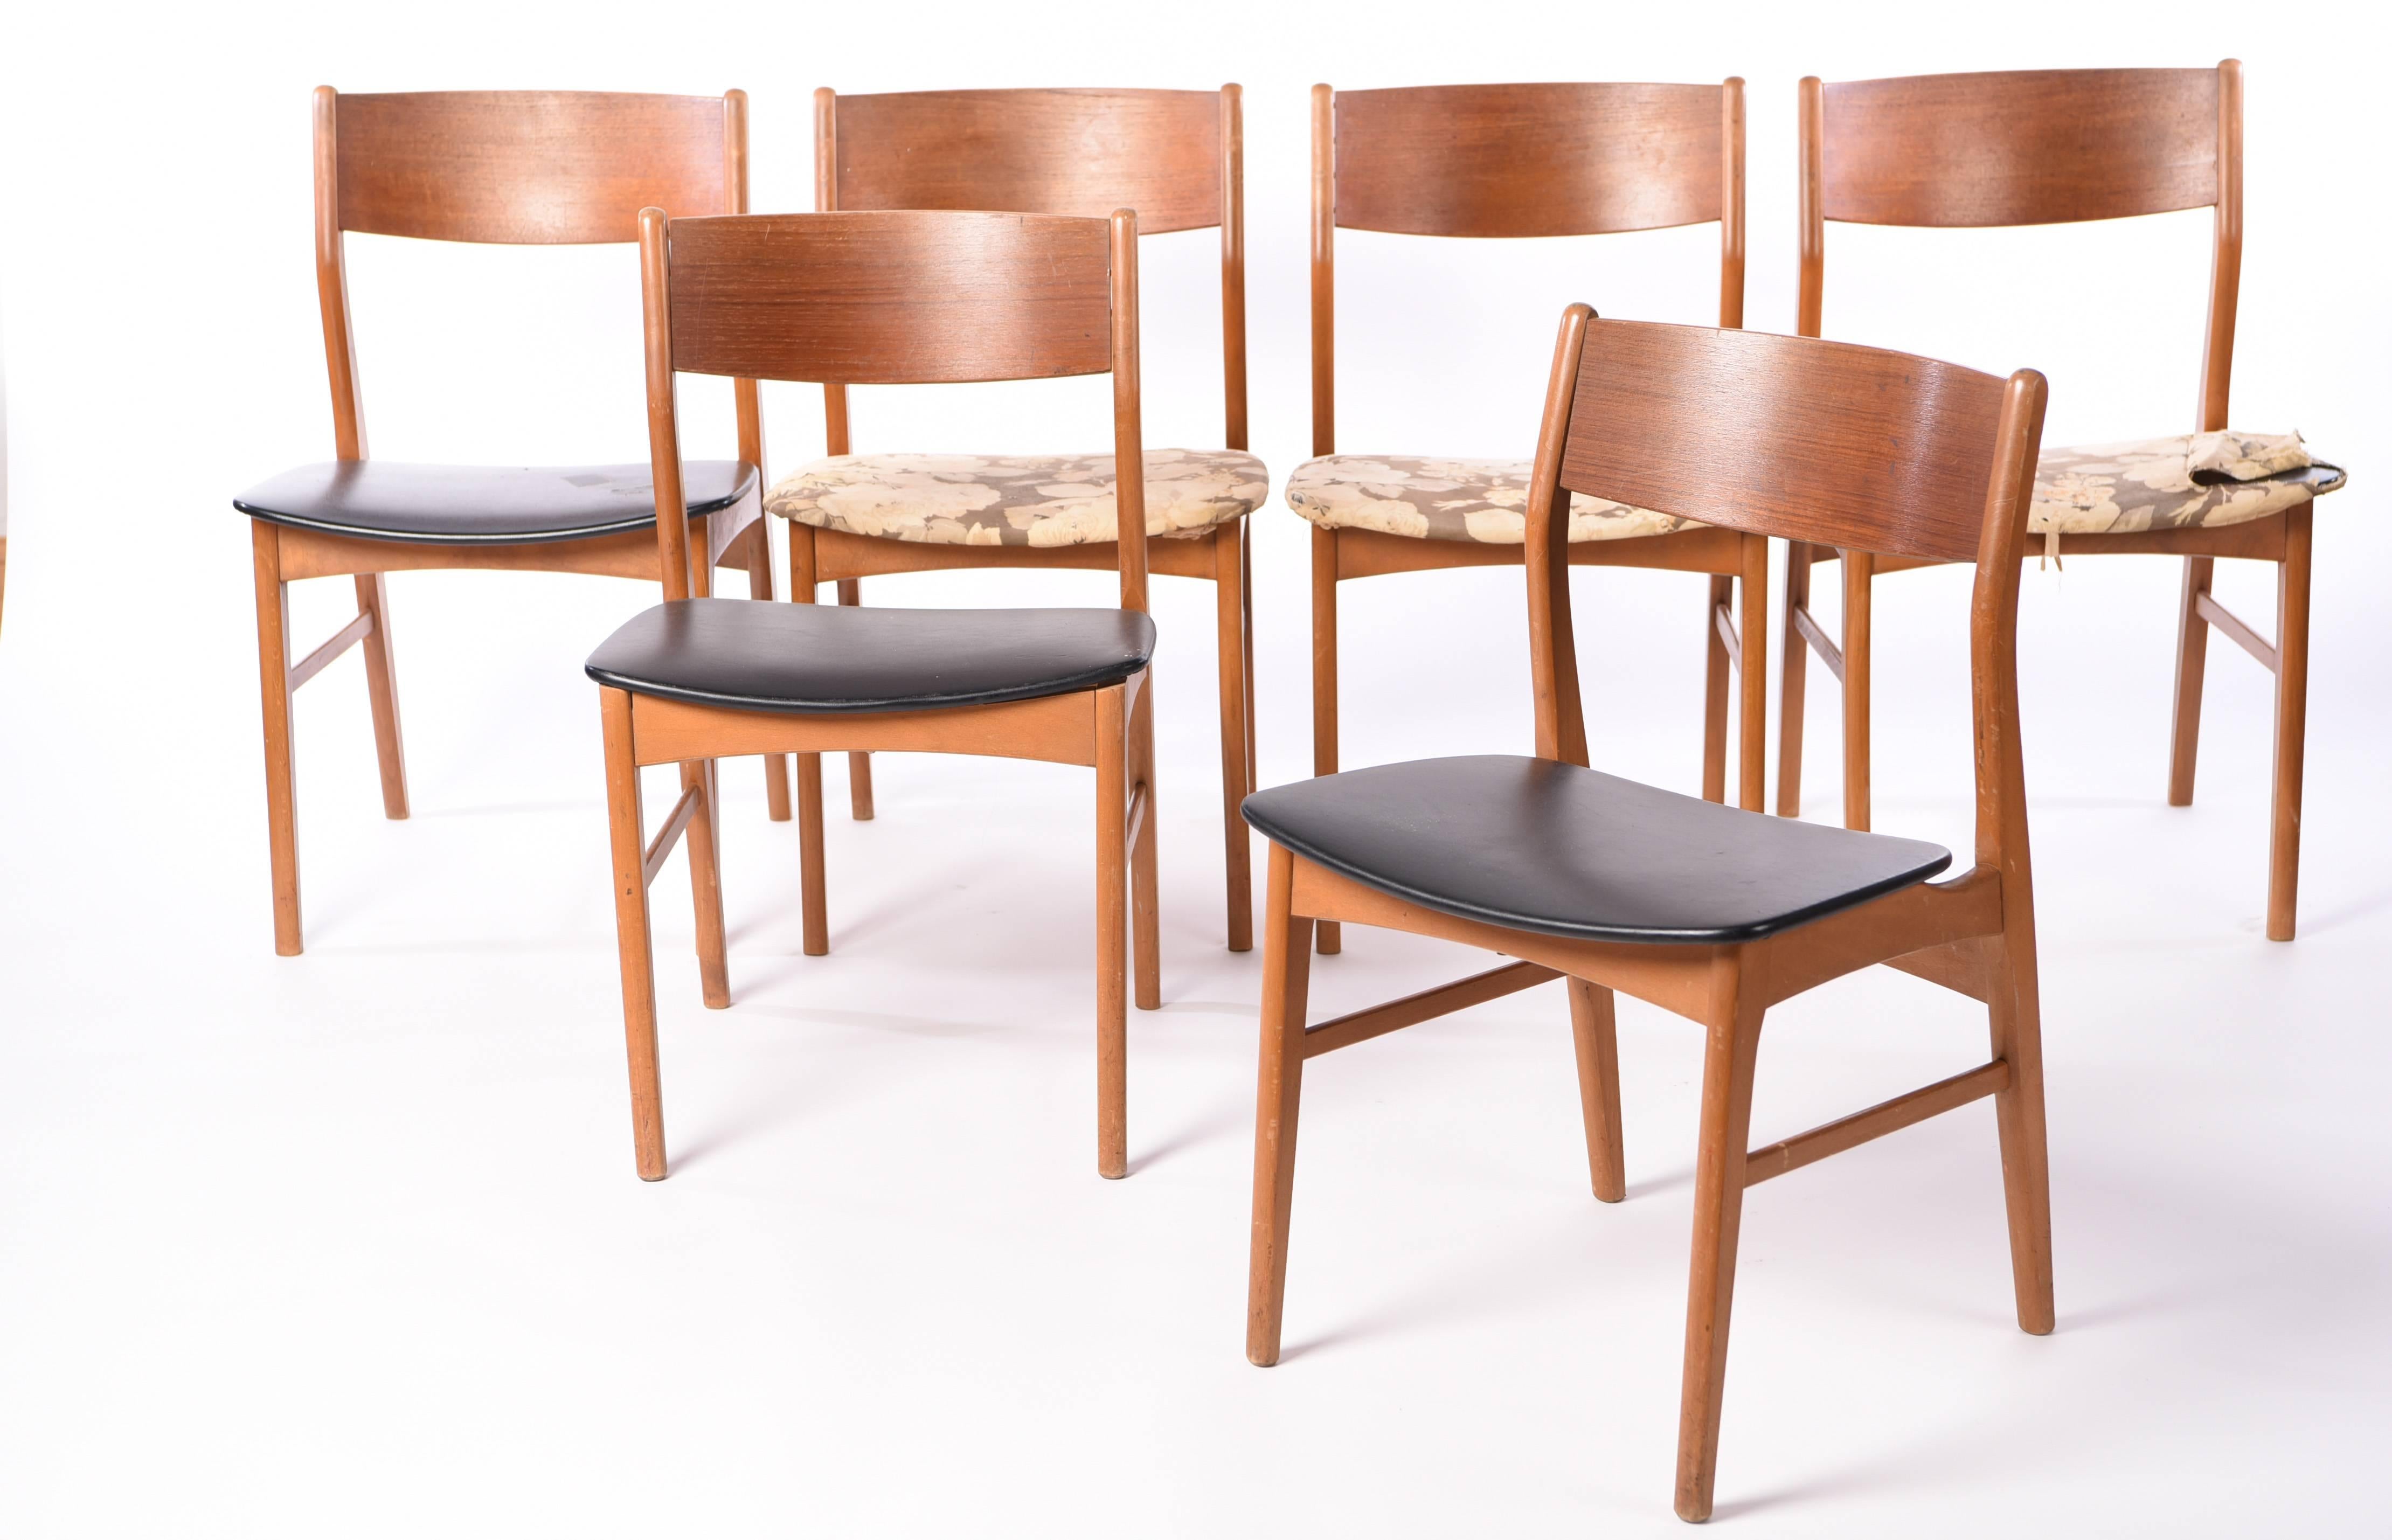 This set of six chairs were manufactured by Danish maker Soro Stolefabrik. They feature teak frames. The upholstery is in as-is condition, which makes this set a great opportunity to customize with new upholstery.